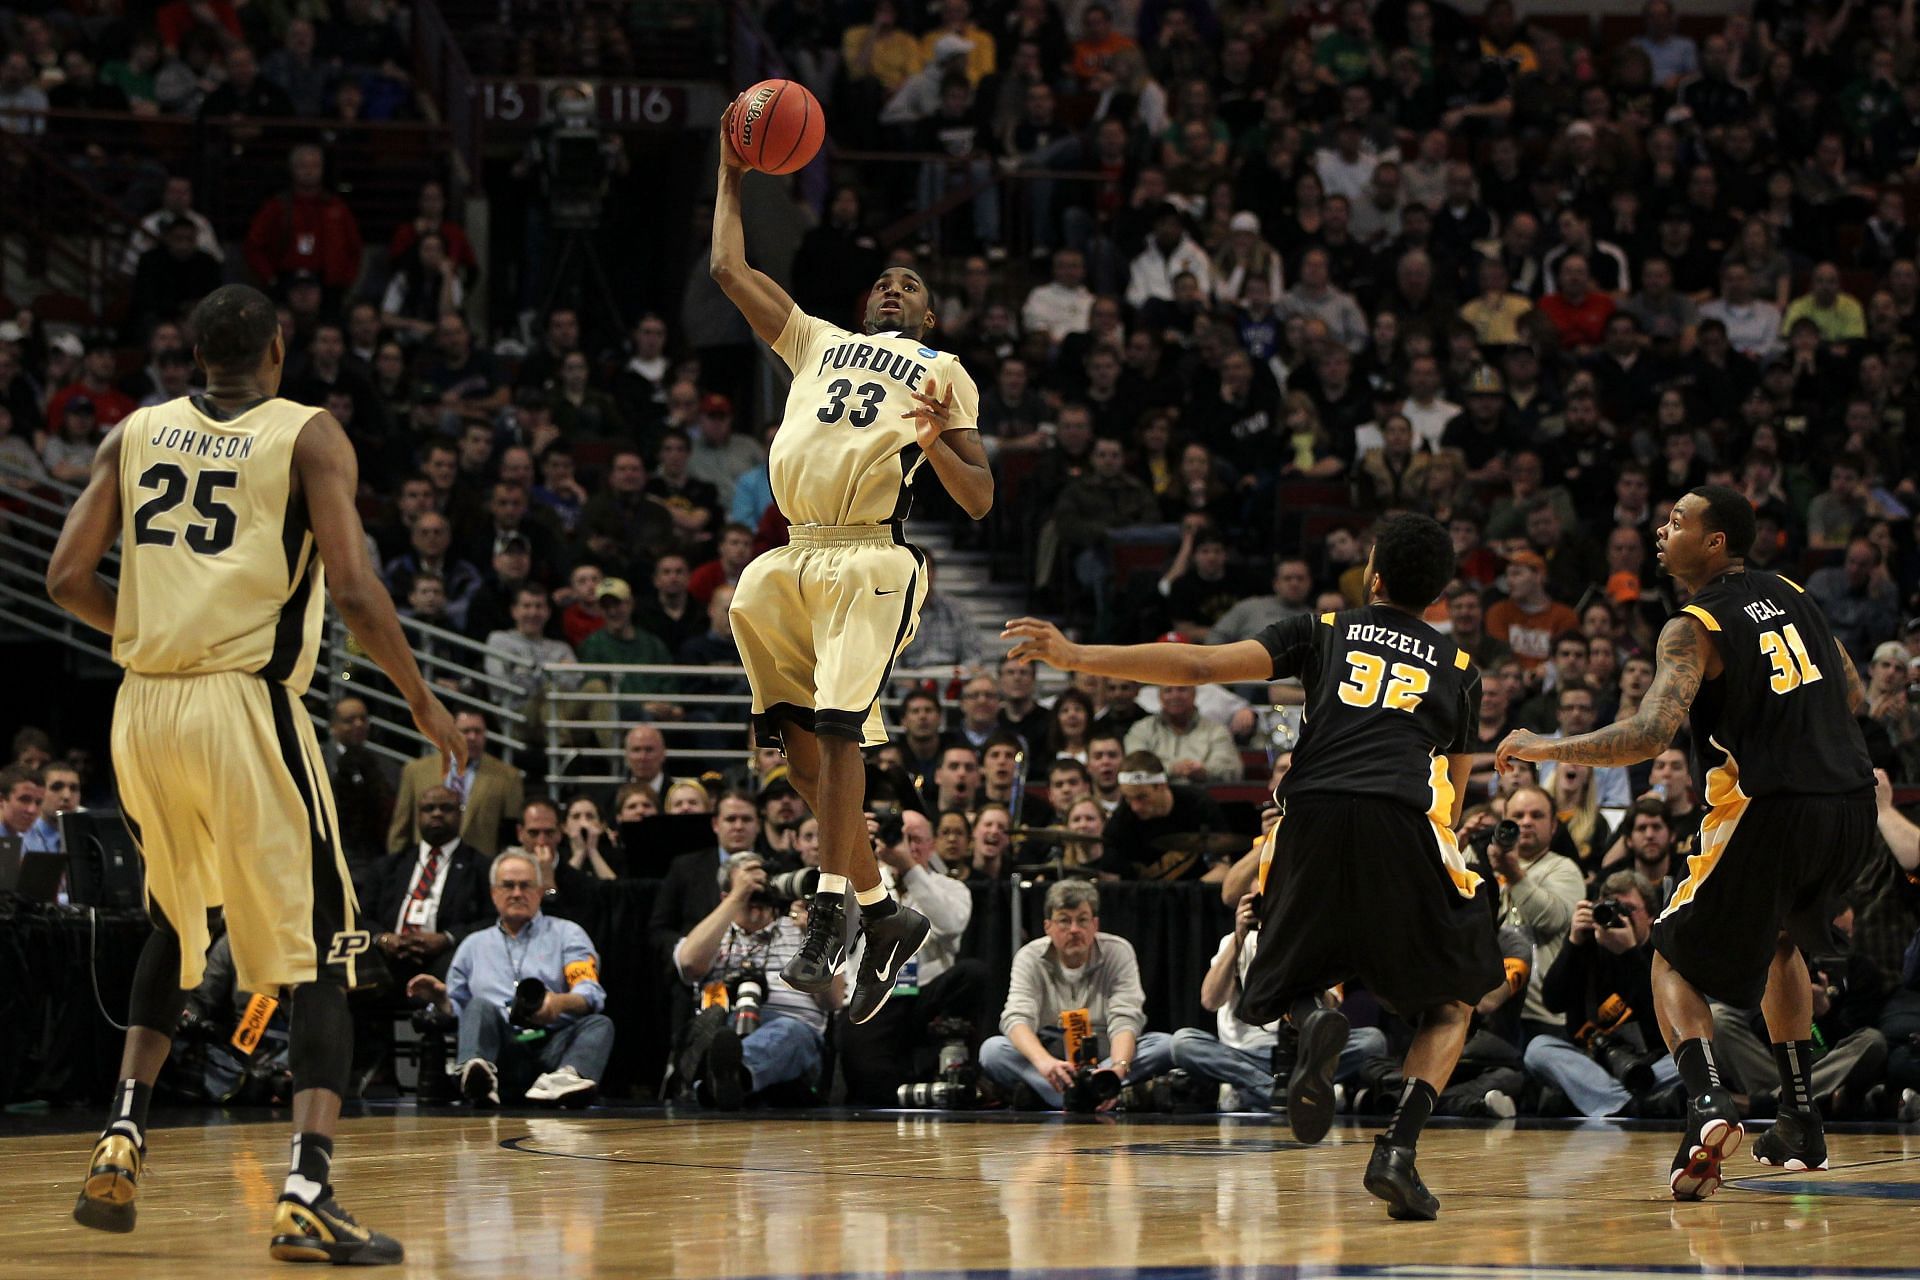 E&#039;Twaun Moore, shown here leaping high, was an underrated Boilermaker hoops legend.